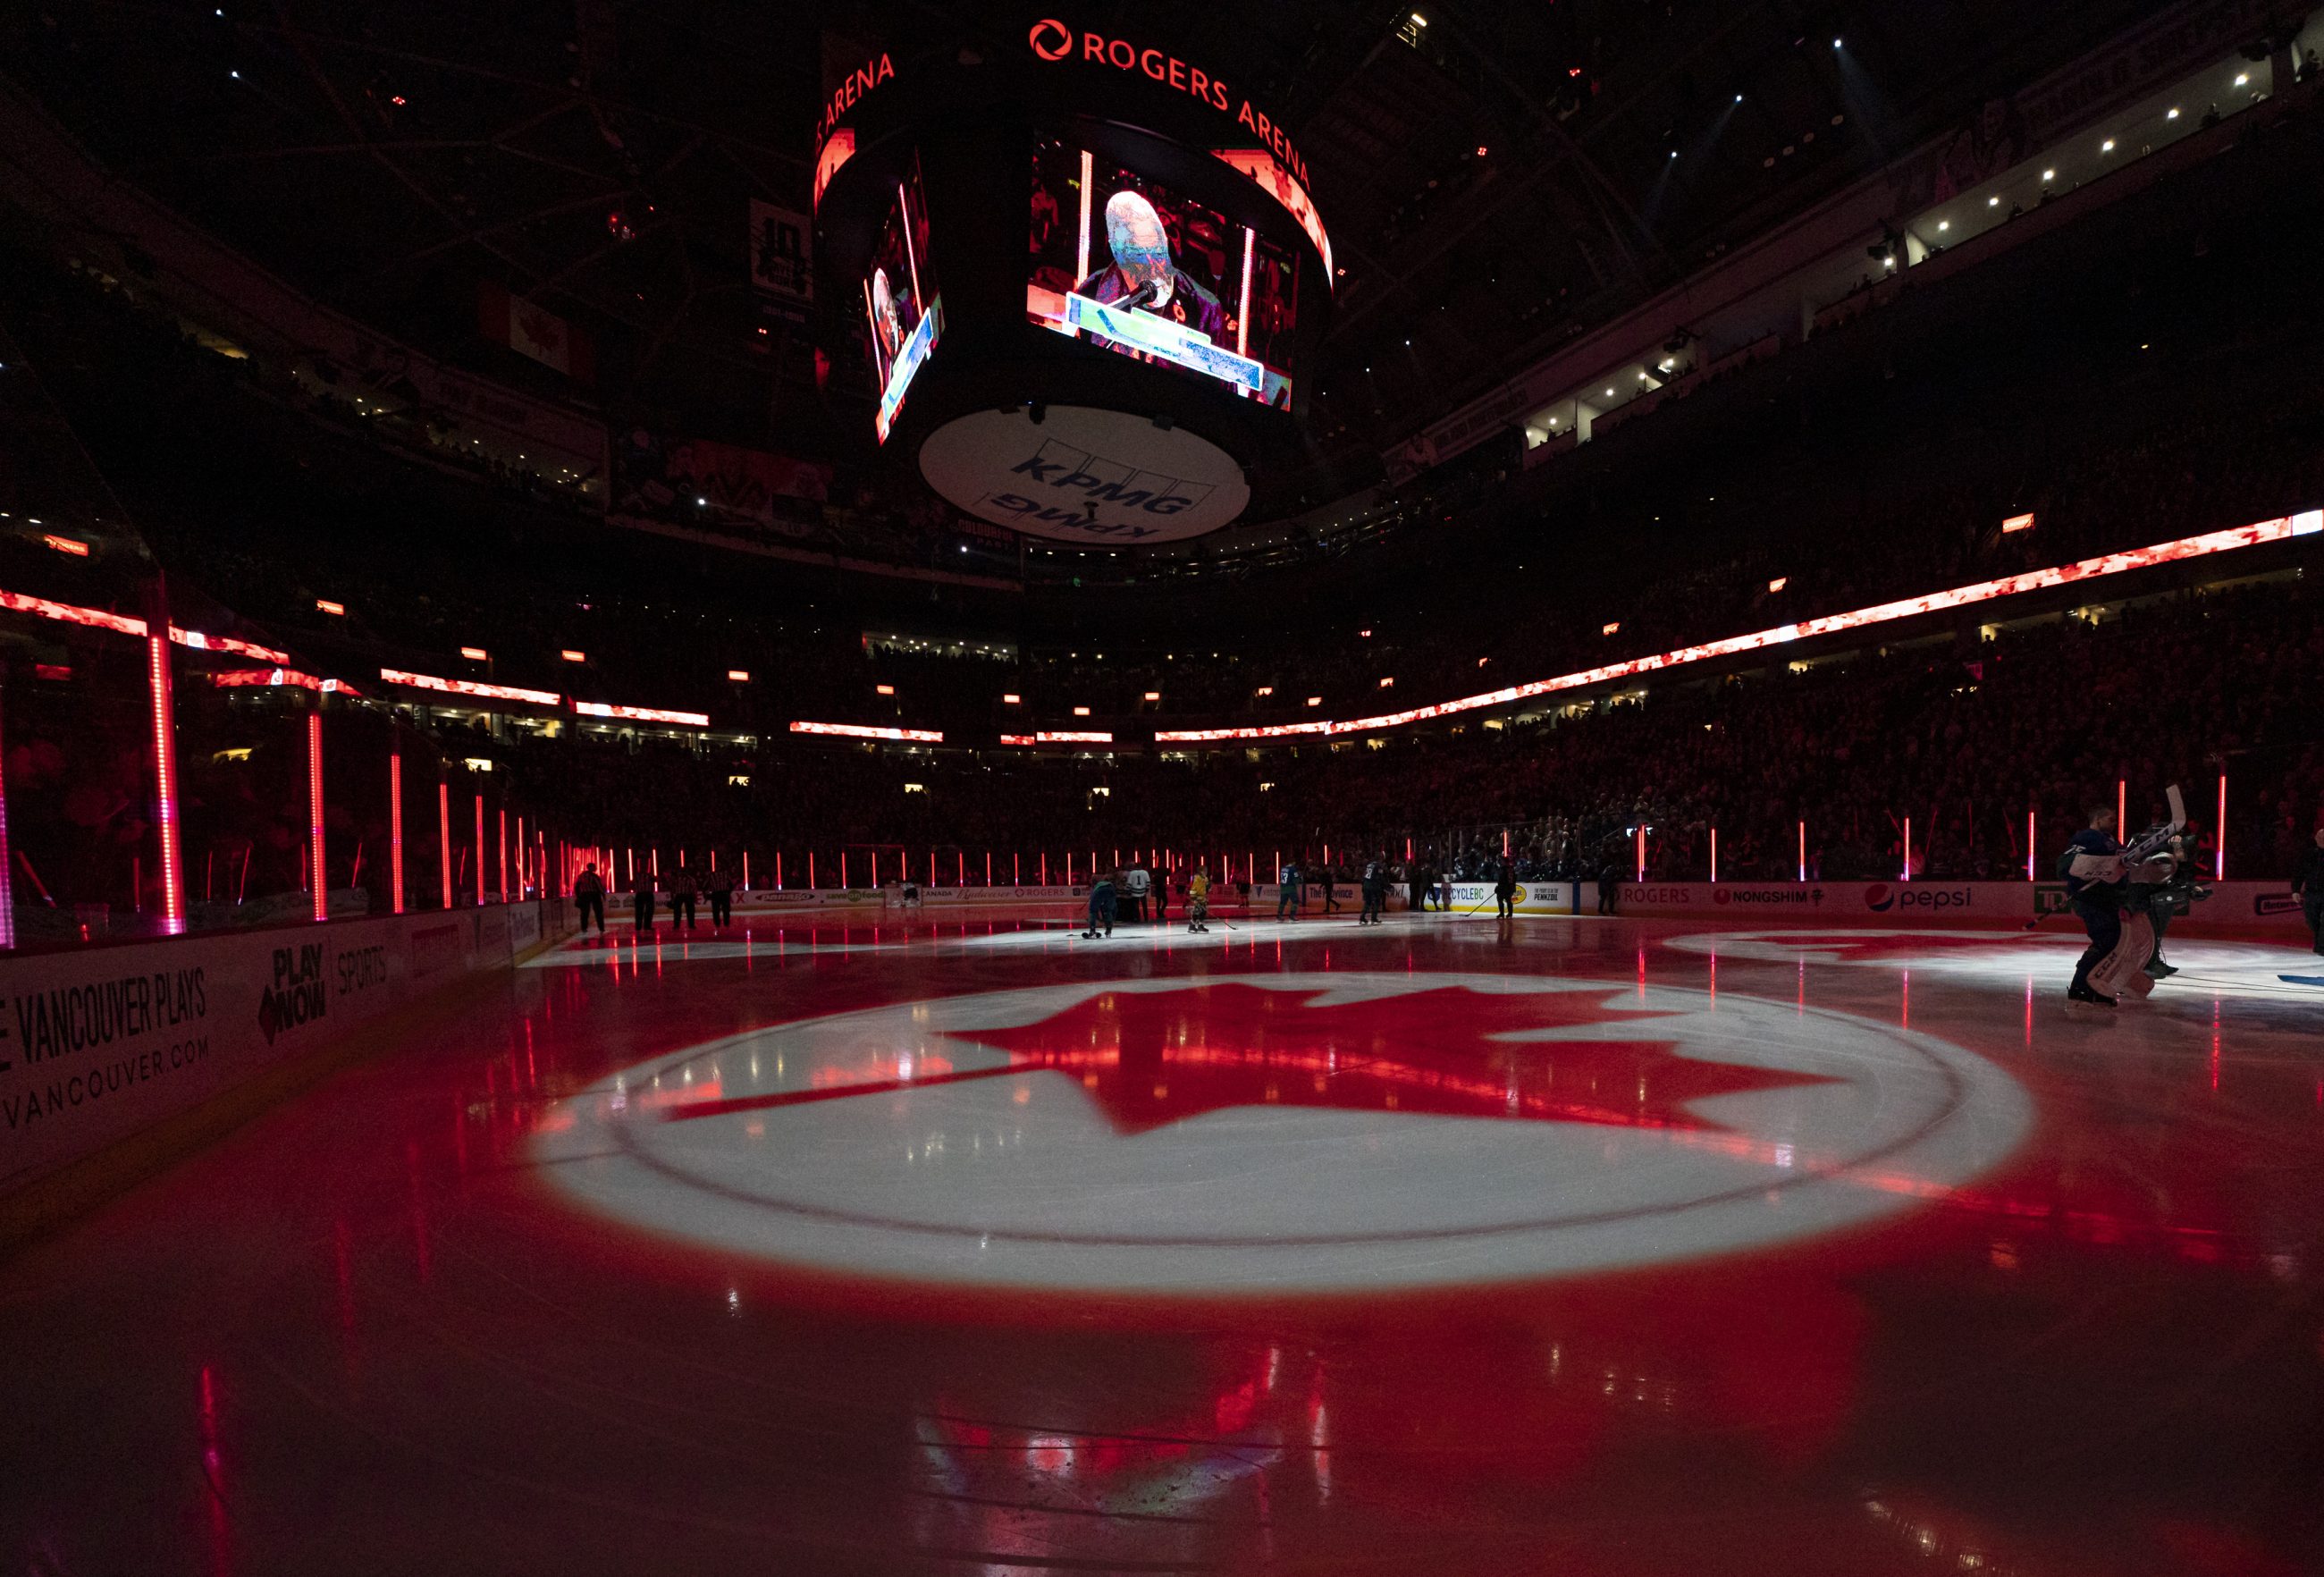 A maple leaf projected onto ice during the Canadian National Anthem